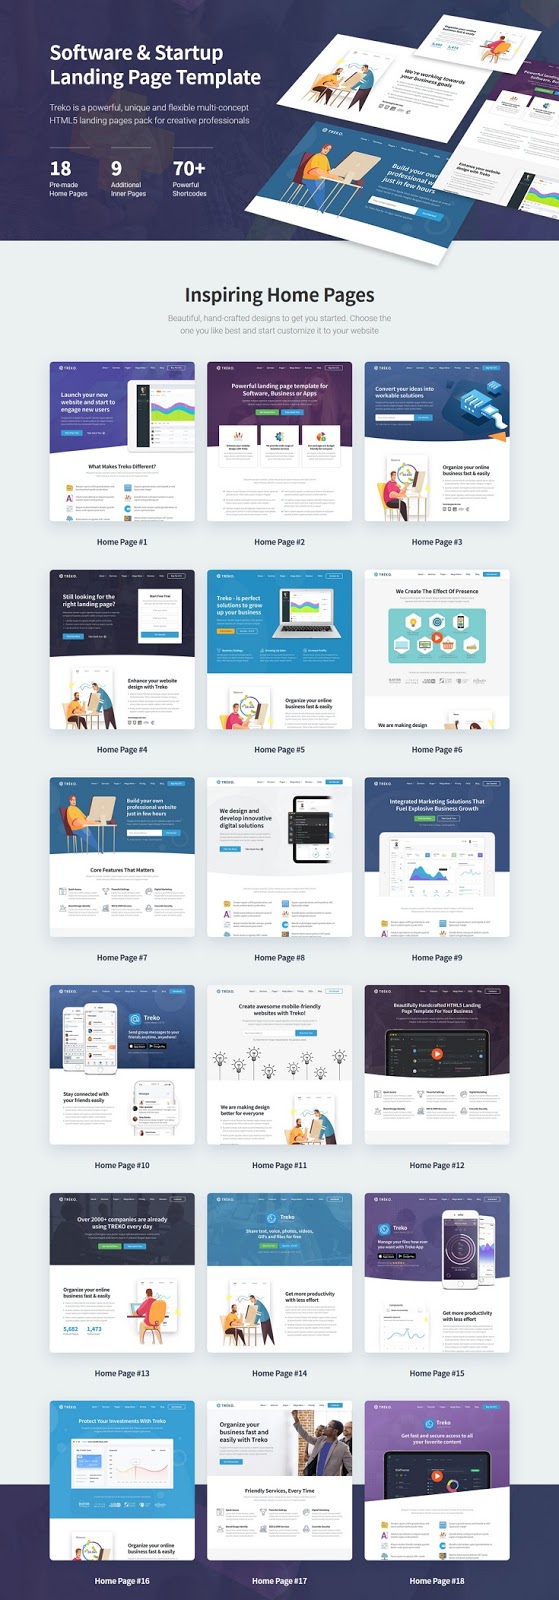 Startup and Software Landing Page Template